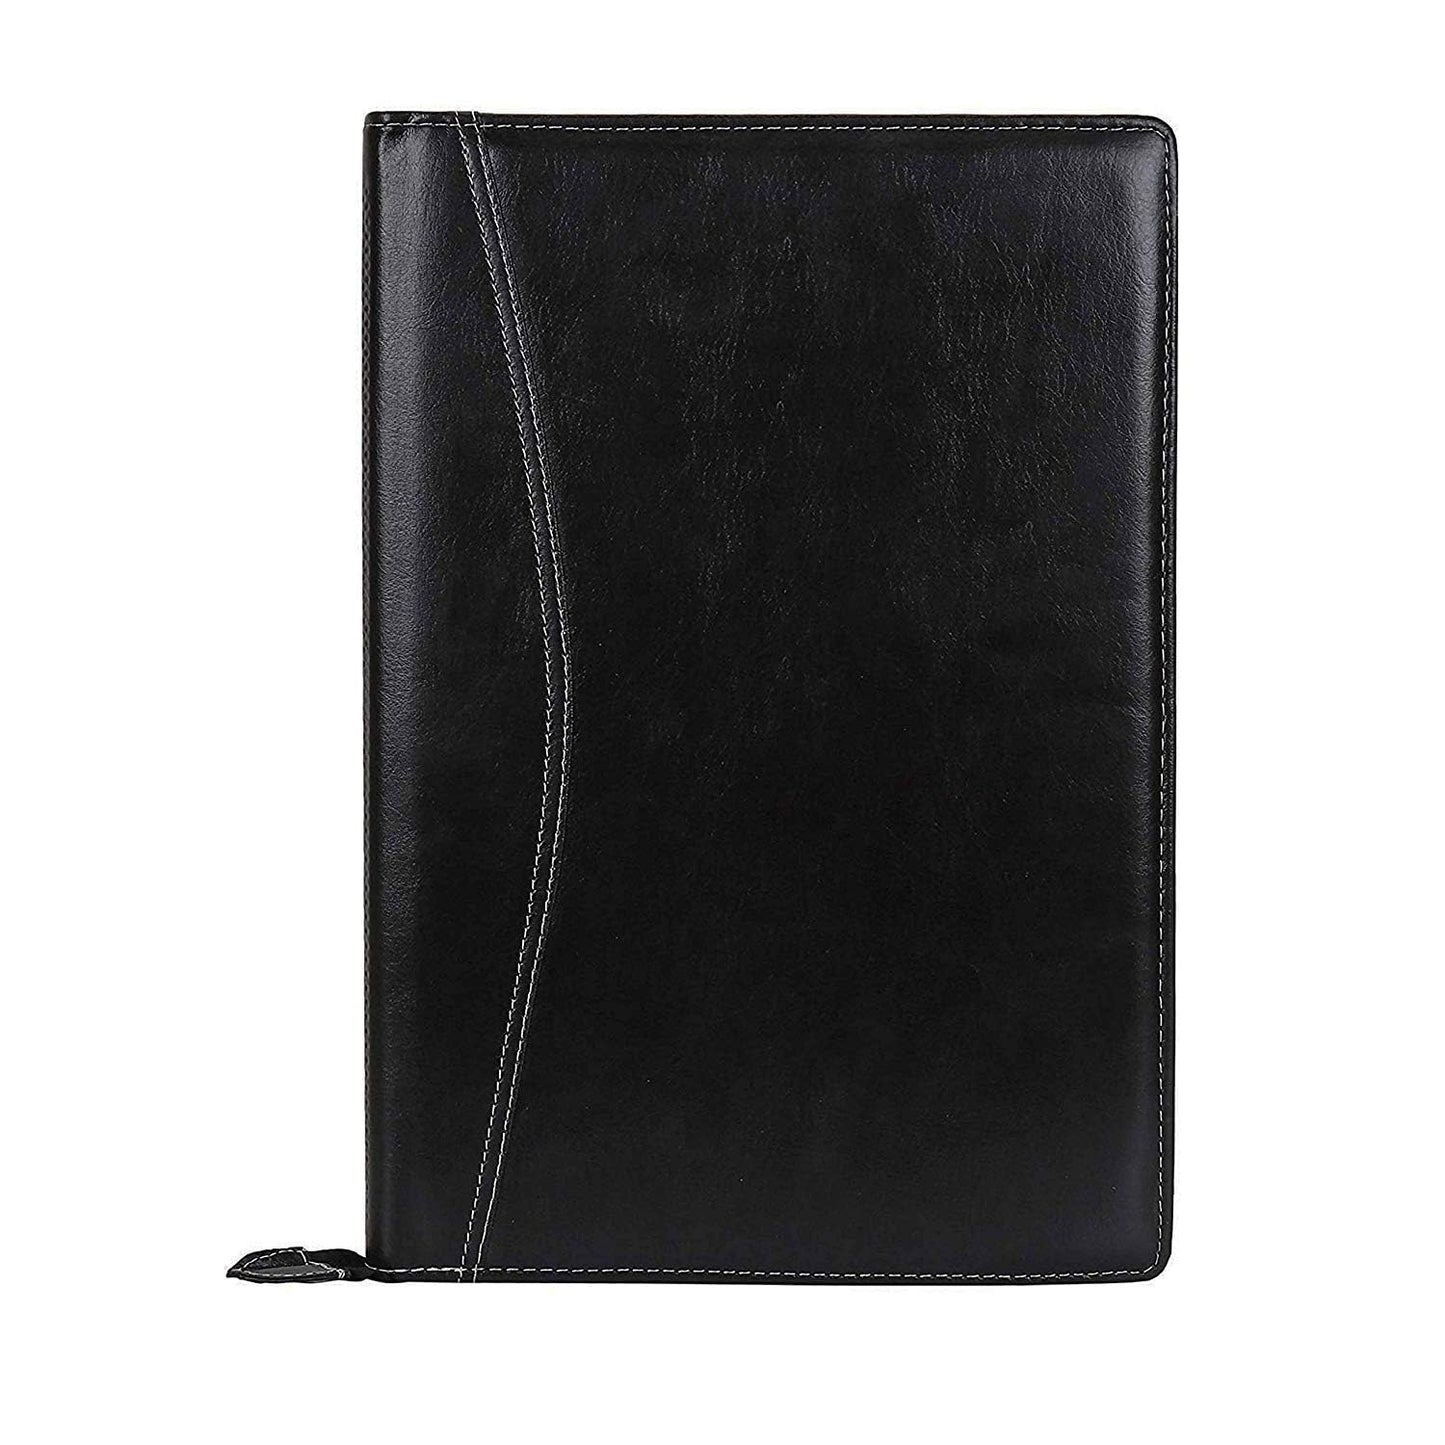 EYUVAA Professional Executive Waterproof Leather Certificate and Documents Organizer File with Pockets, Zip Closure and Card Holder -B4, 20 Leafs (Black)